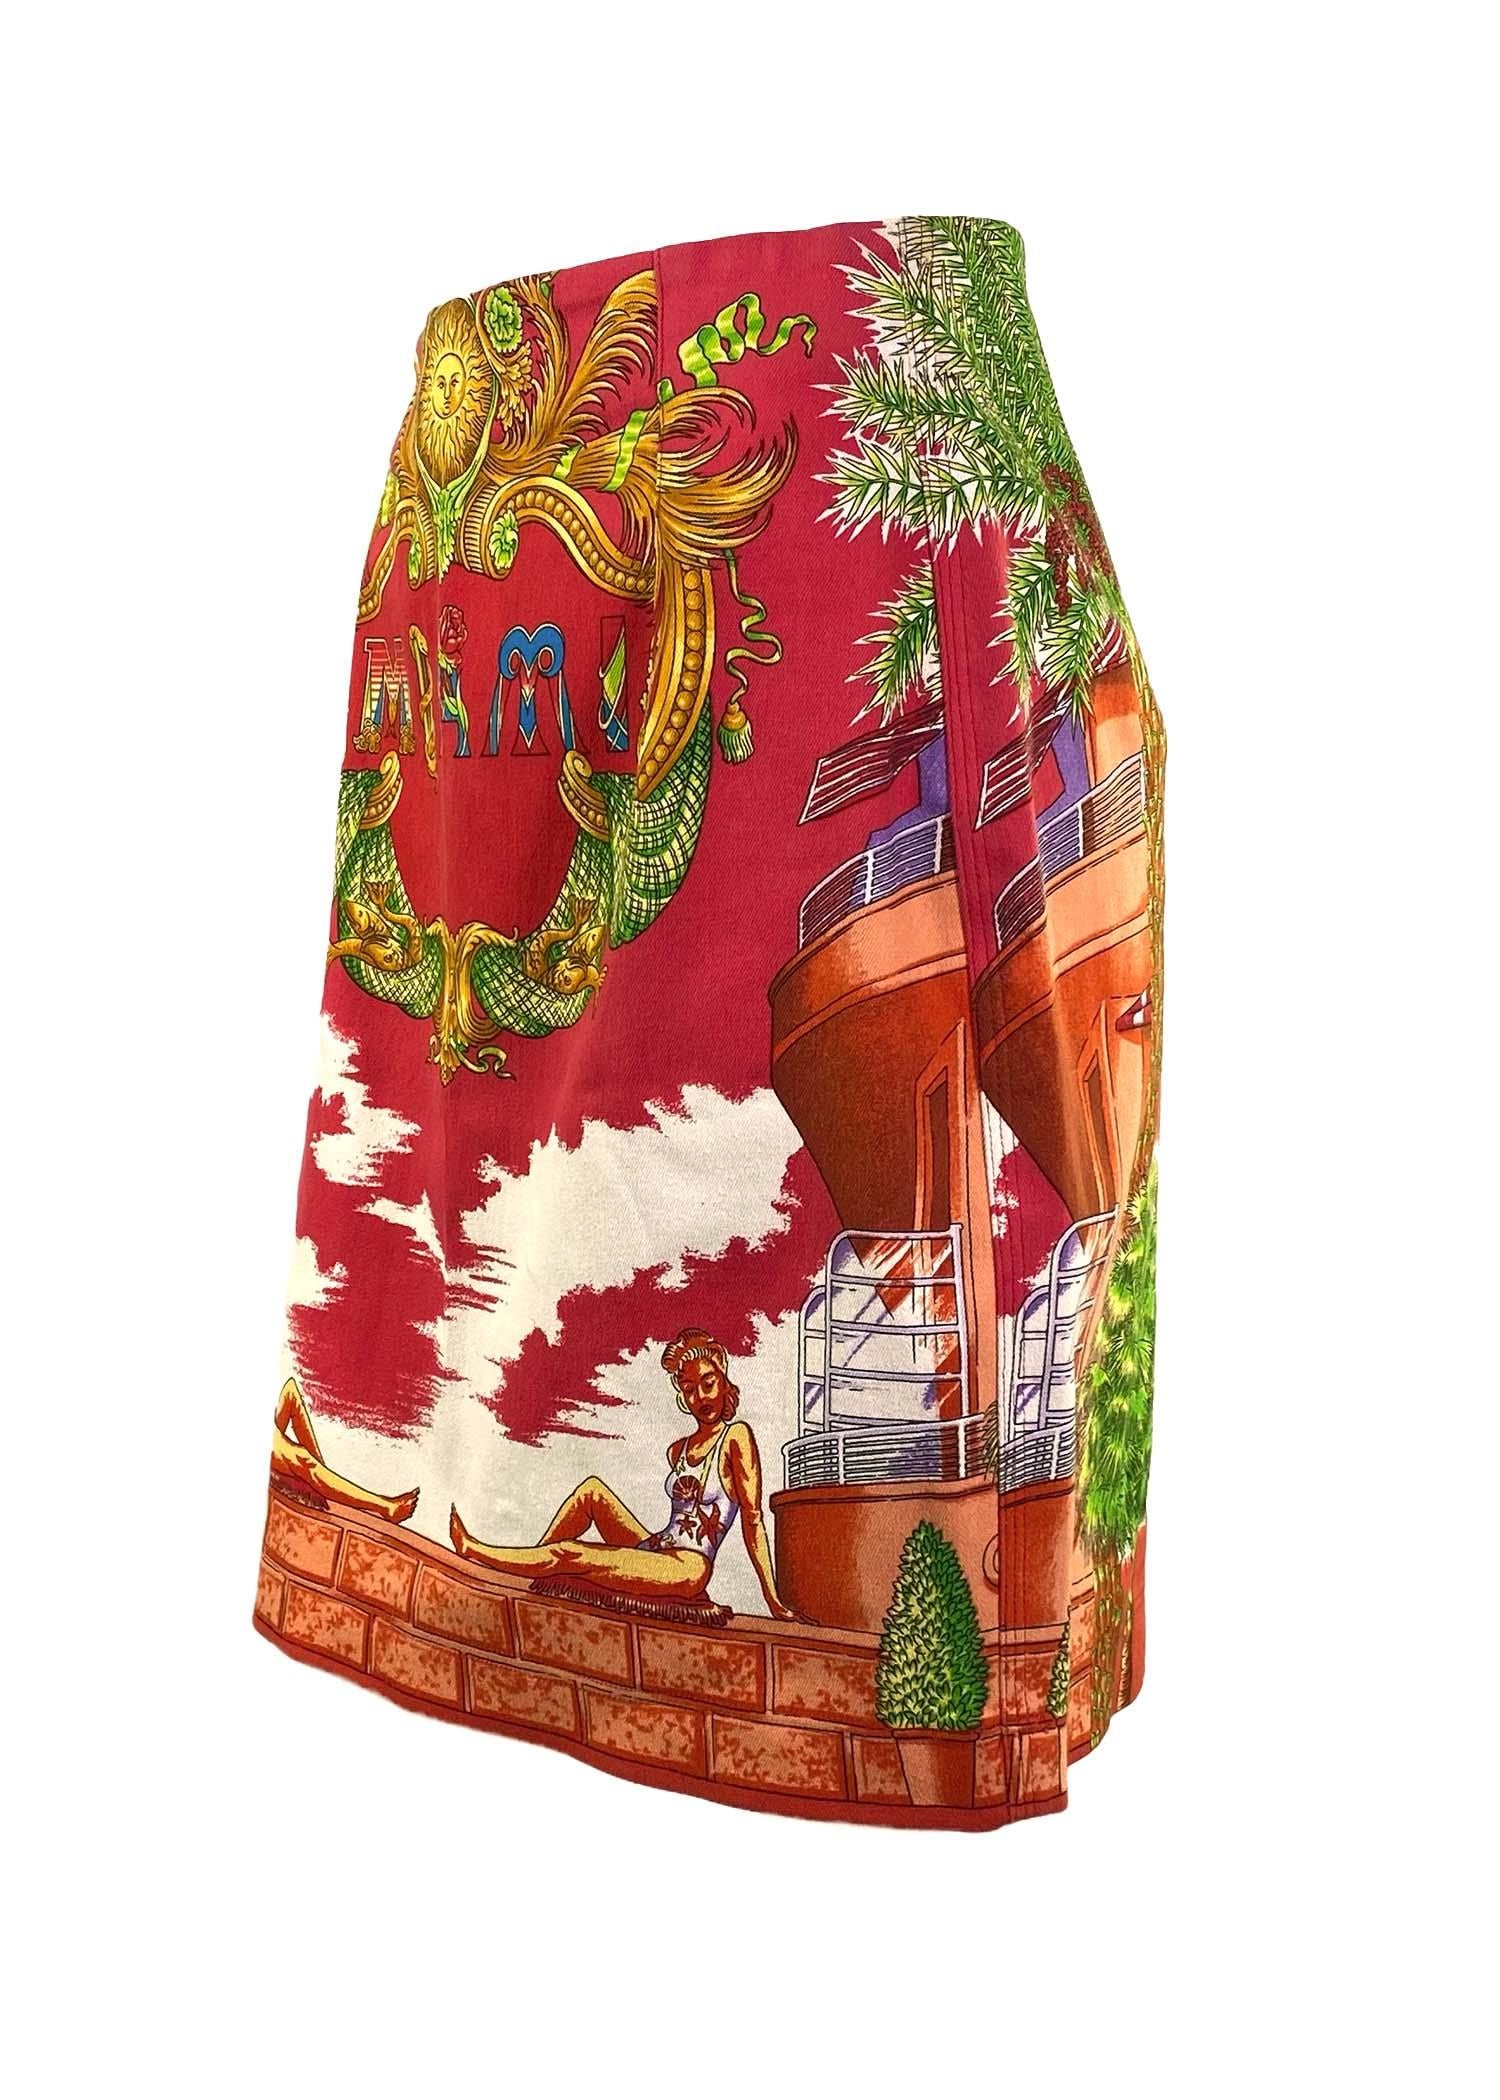 TheRealList presents: the Miami print Gianni Versace skirt of your dreams, designed by Gianni Versace. This skirt from the Spring/Summer 1993 collection, commonly known as the ‘Miami’ collection, features a bright print depicting a beach scene with